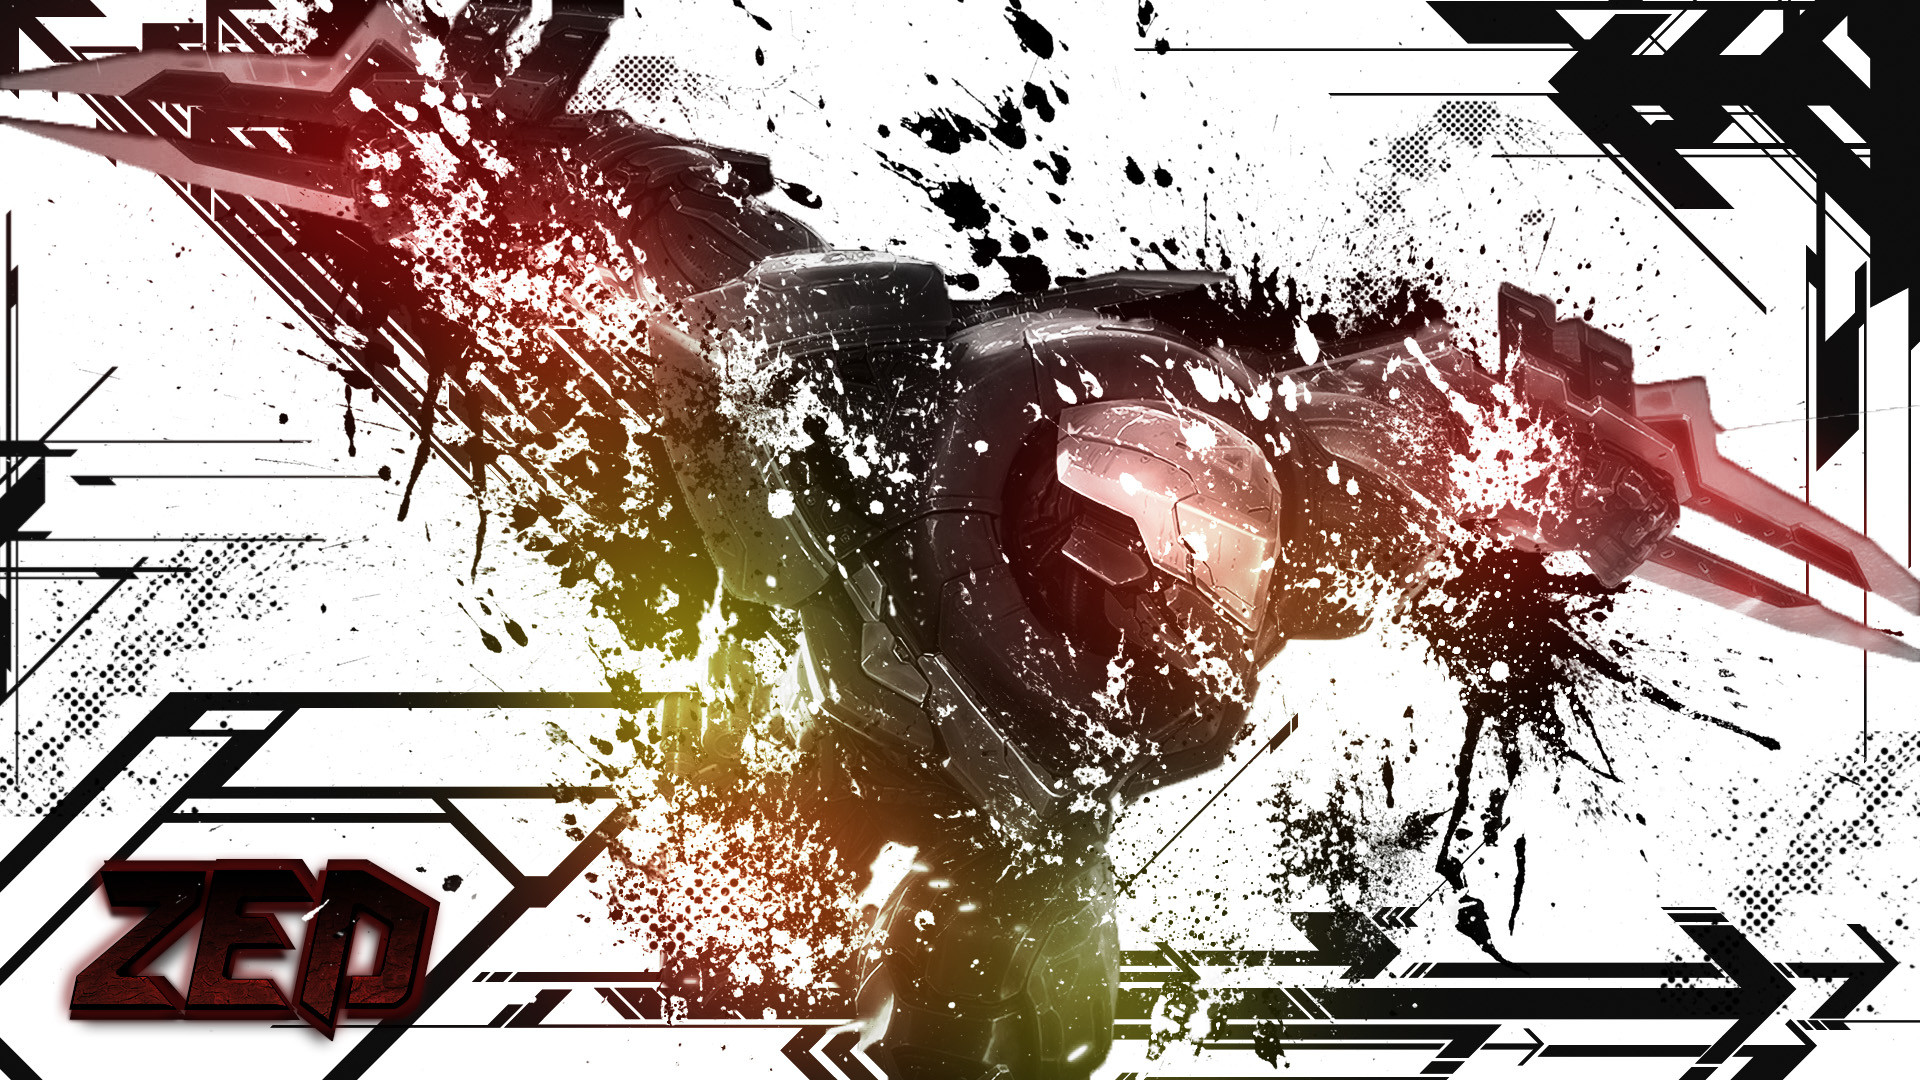 1920x1080 Project Zed Wallpaper by xsurfspyx Project Zed Wallpaper by xsurfspyx